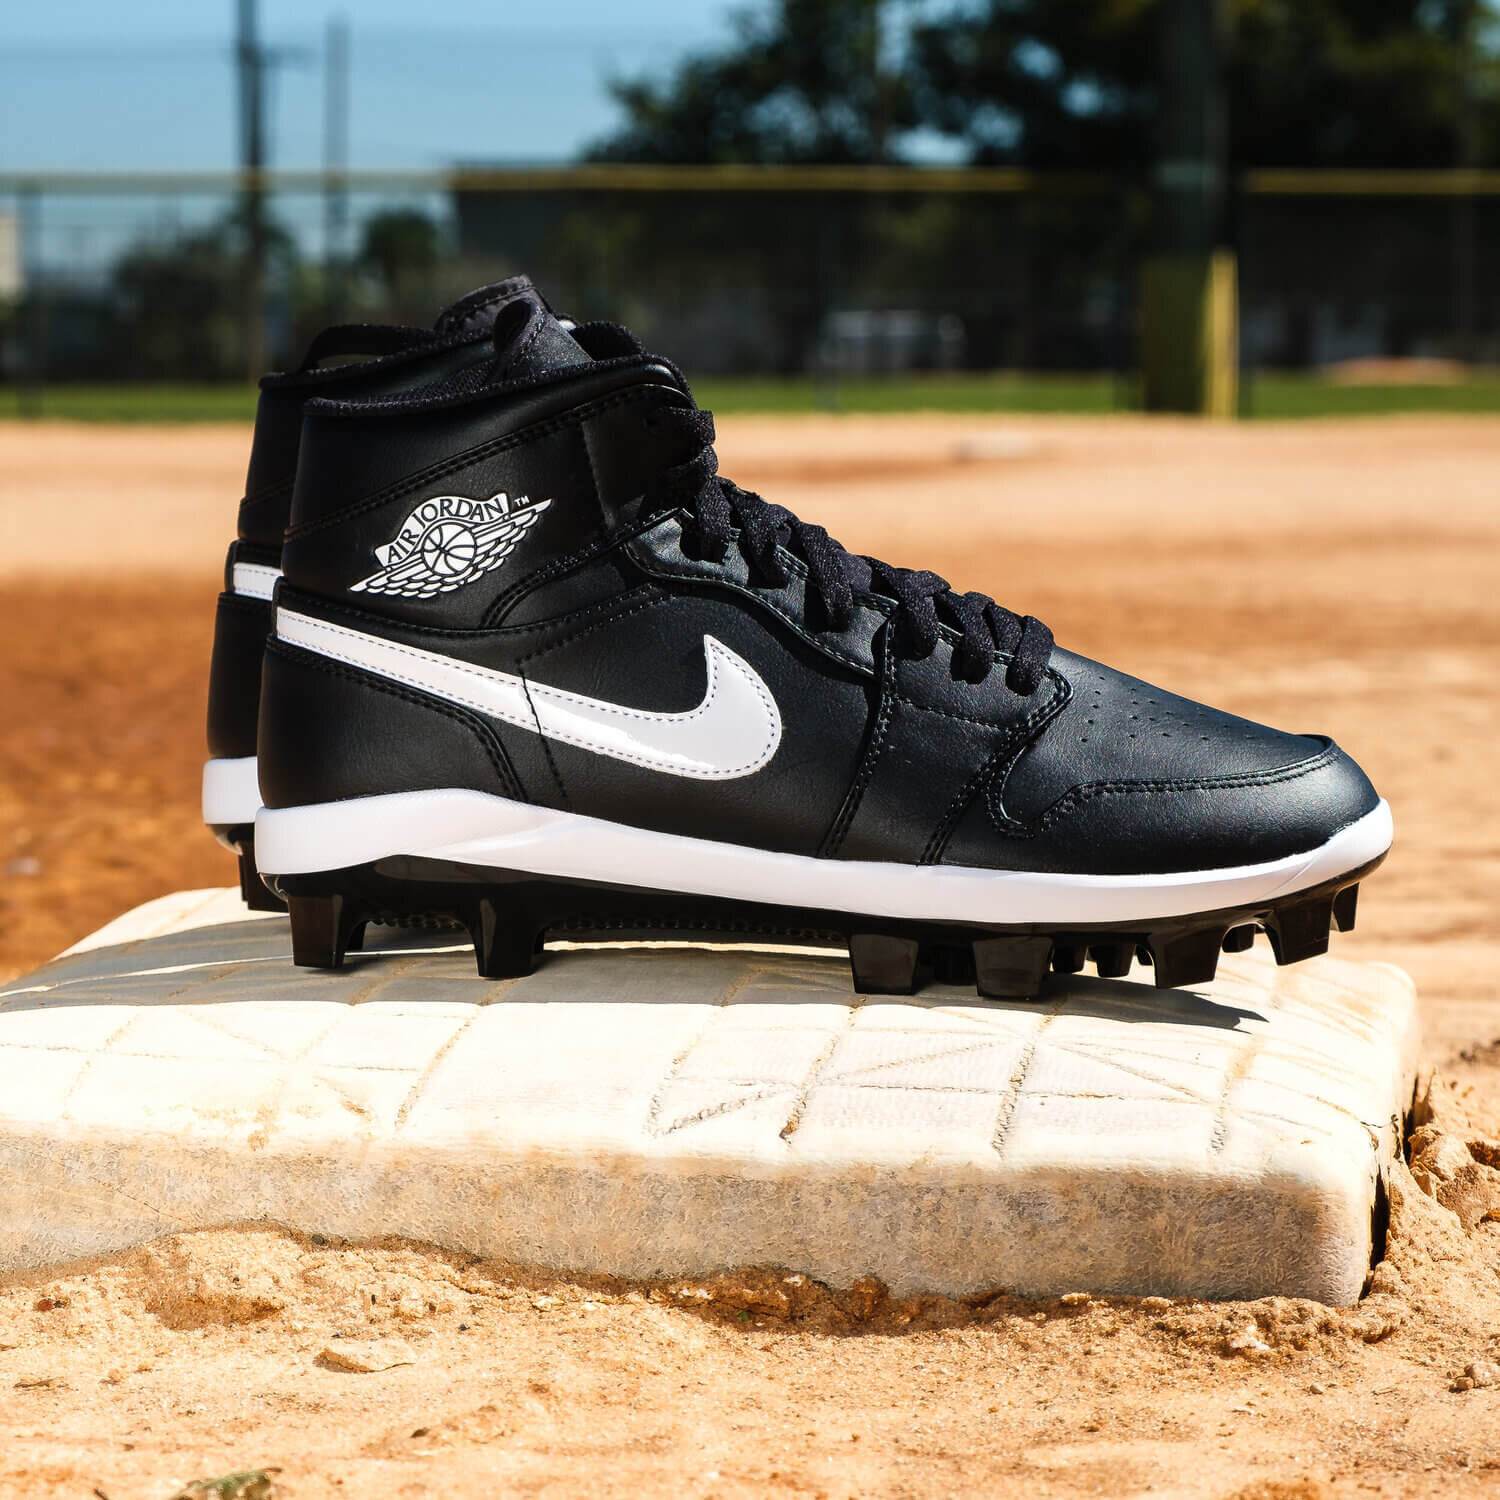 Baseball-Sneaker-Cleat-Product-photography-Miami-1.jpg